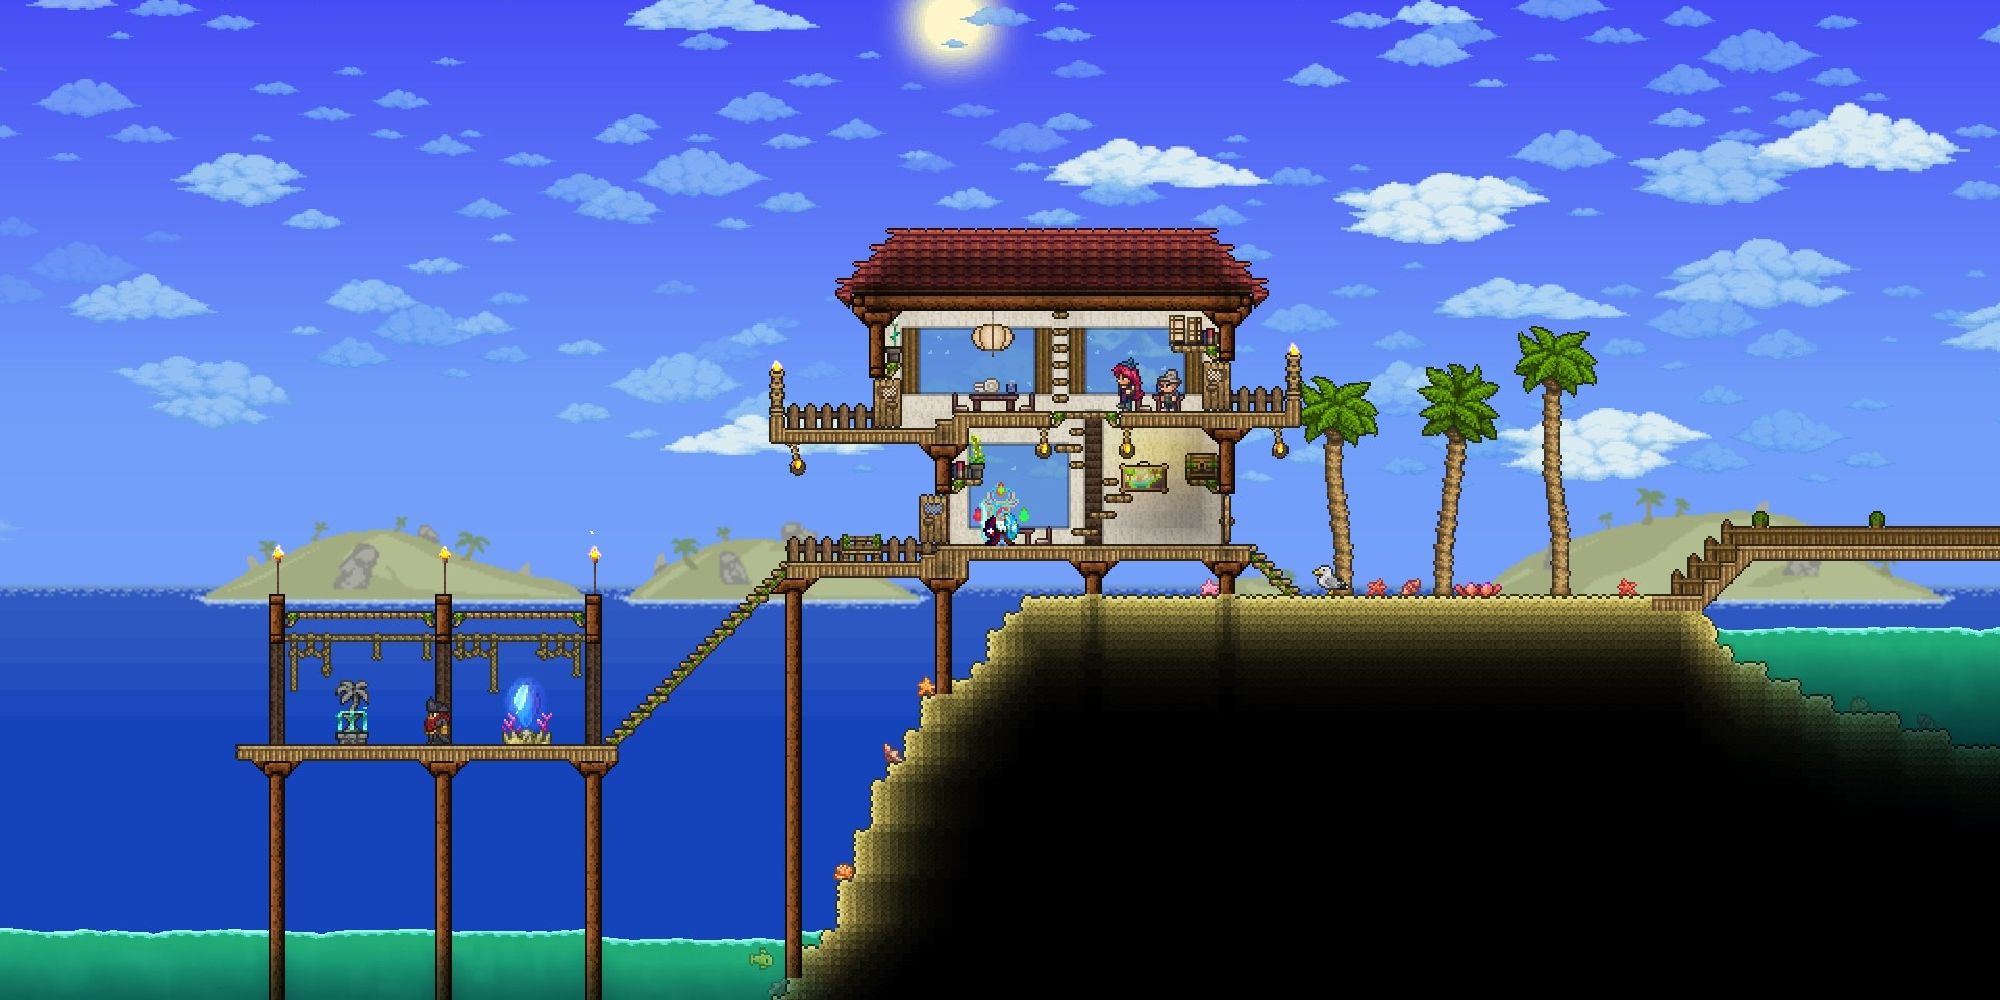 player in raised house by the beach